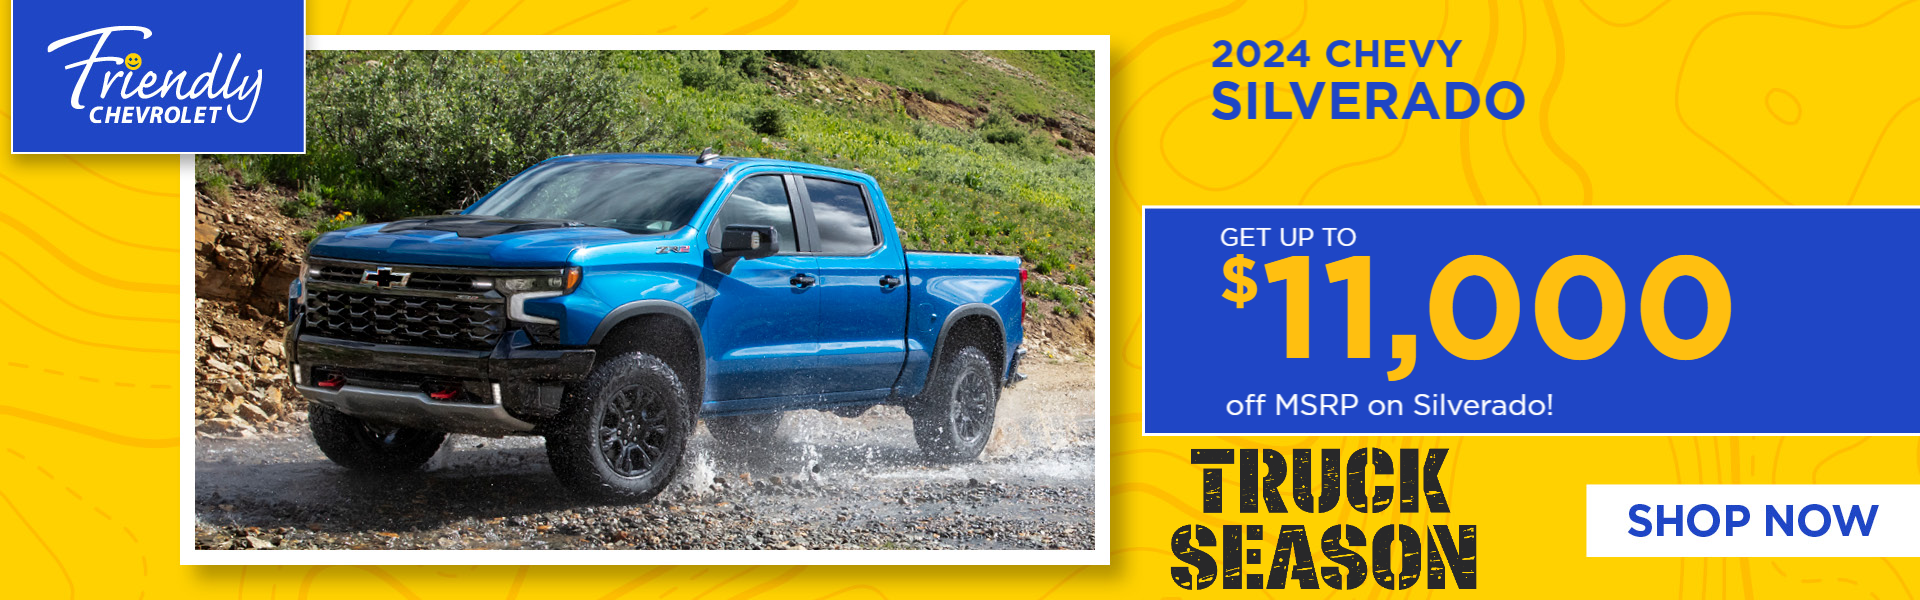 Get up to $11,000 Off MSRP on a 2024 Silverado